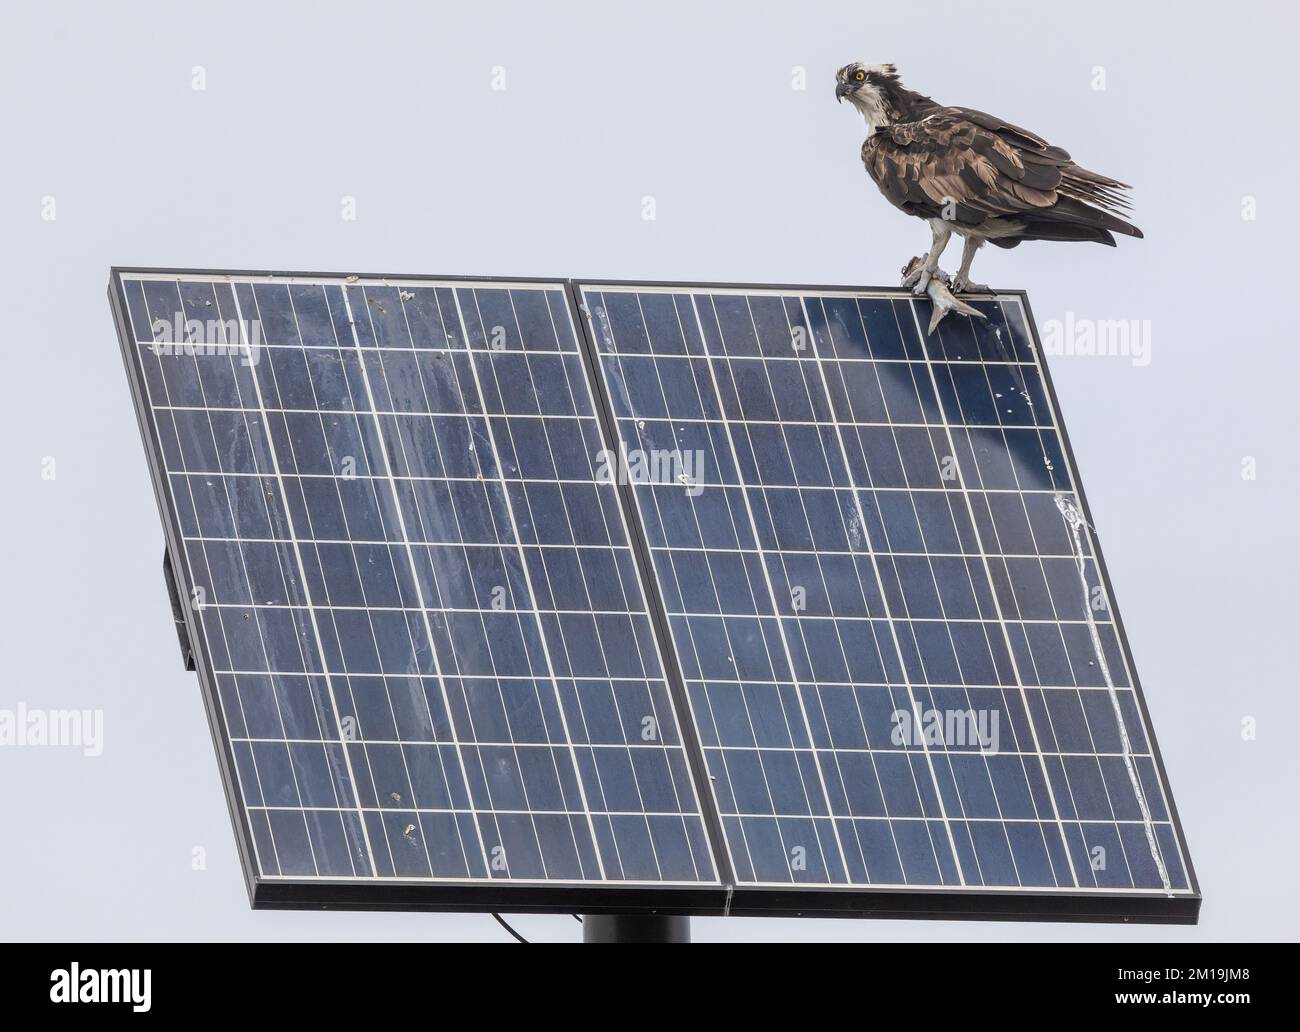 Osprey, Pandion haliaetus, with prey, perched on solar panel array. South Padre, Texas. Stock Photo